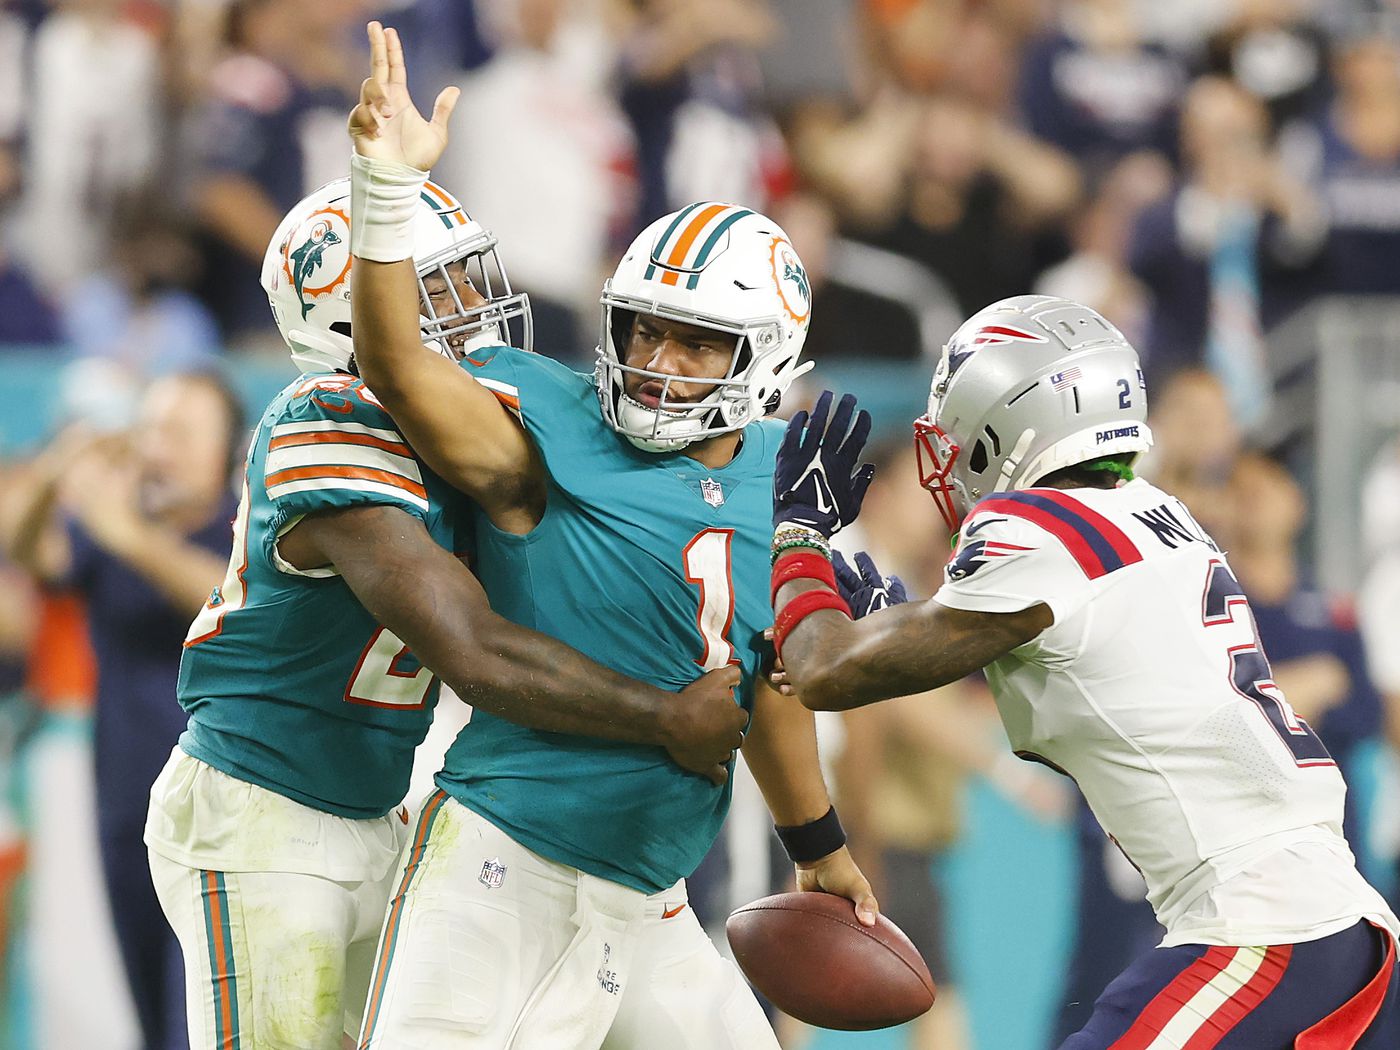 Miami Dolphins Football Schedule 2022 Dolphins 2022 Schedule: Opponents Set For Next Year - The Phinsider